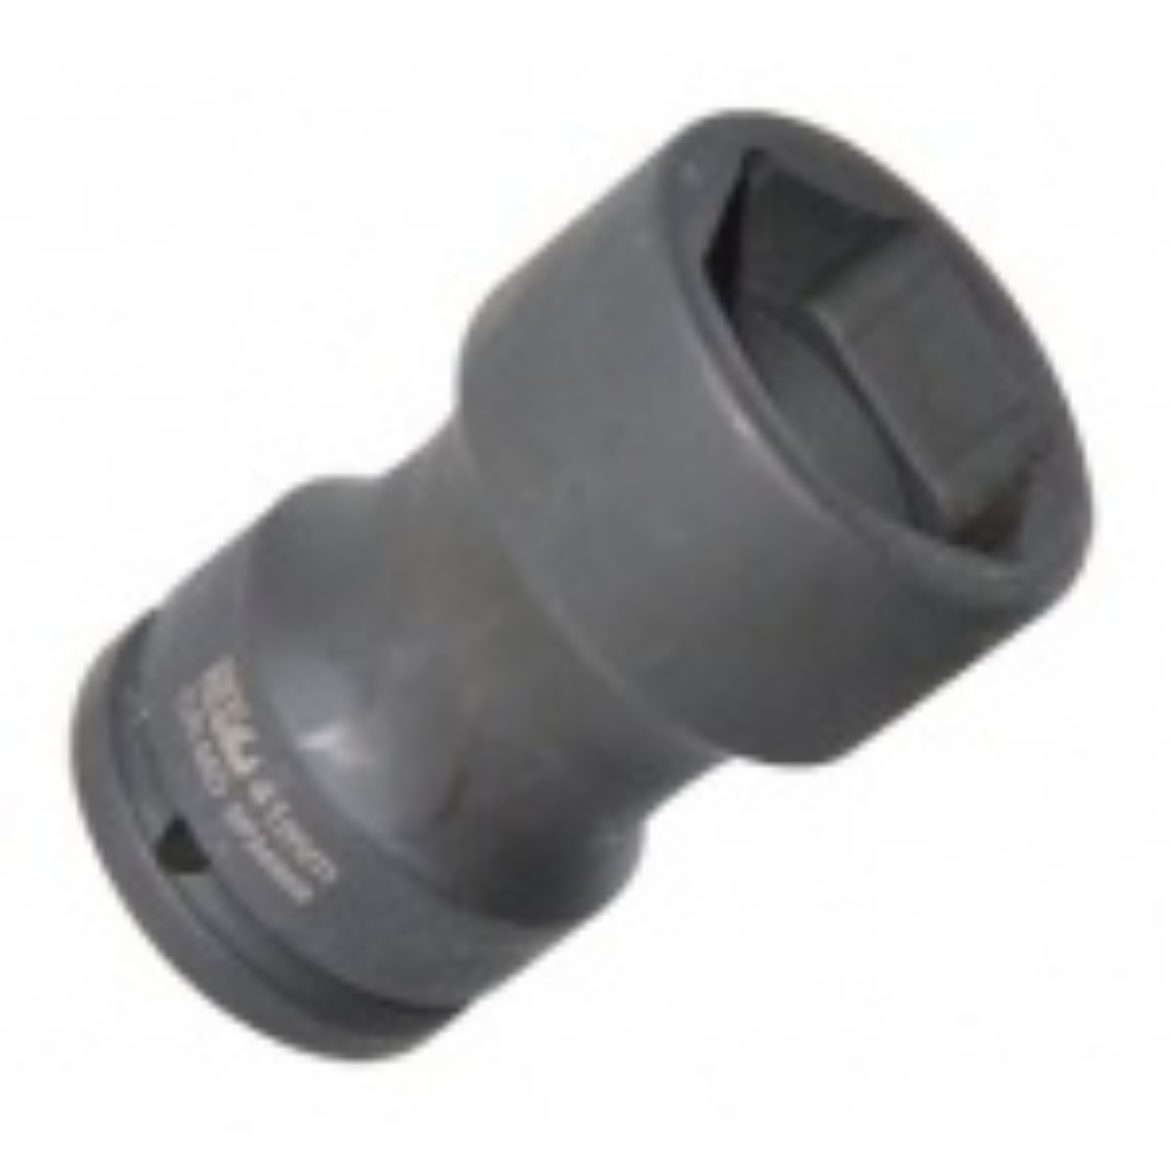 Picture of SOCKET IMPACT 3/4"DR BUDD WHEEL METRIC 41MM SP TOOLS